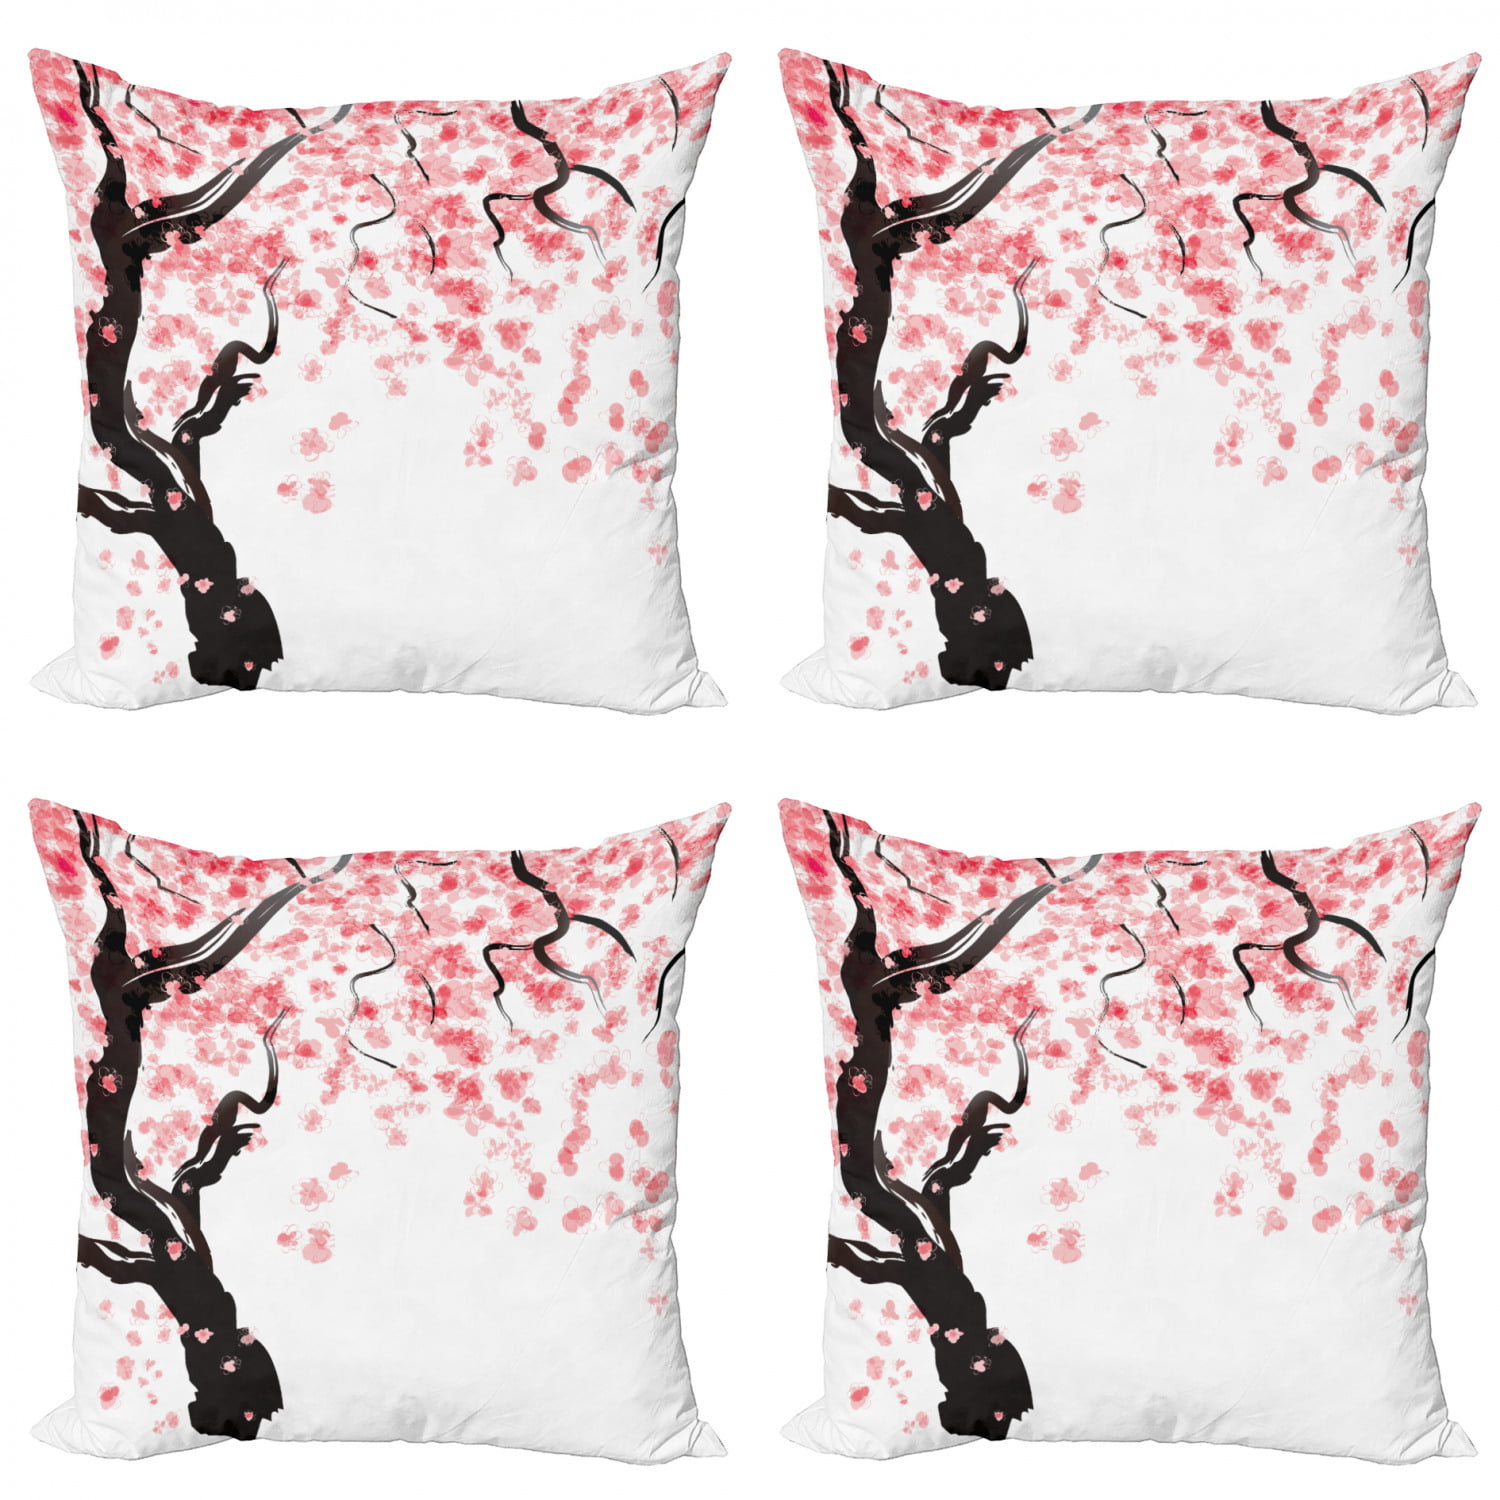 TEXAS TEEZ Pink Dogwood Makes This A Perfect Home Decor Fashion Throw Pillow 18x18 Multicolor